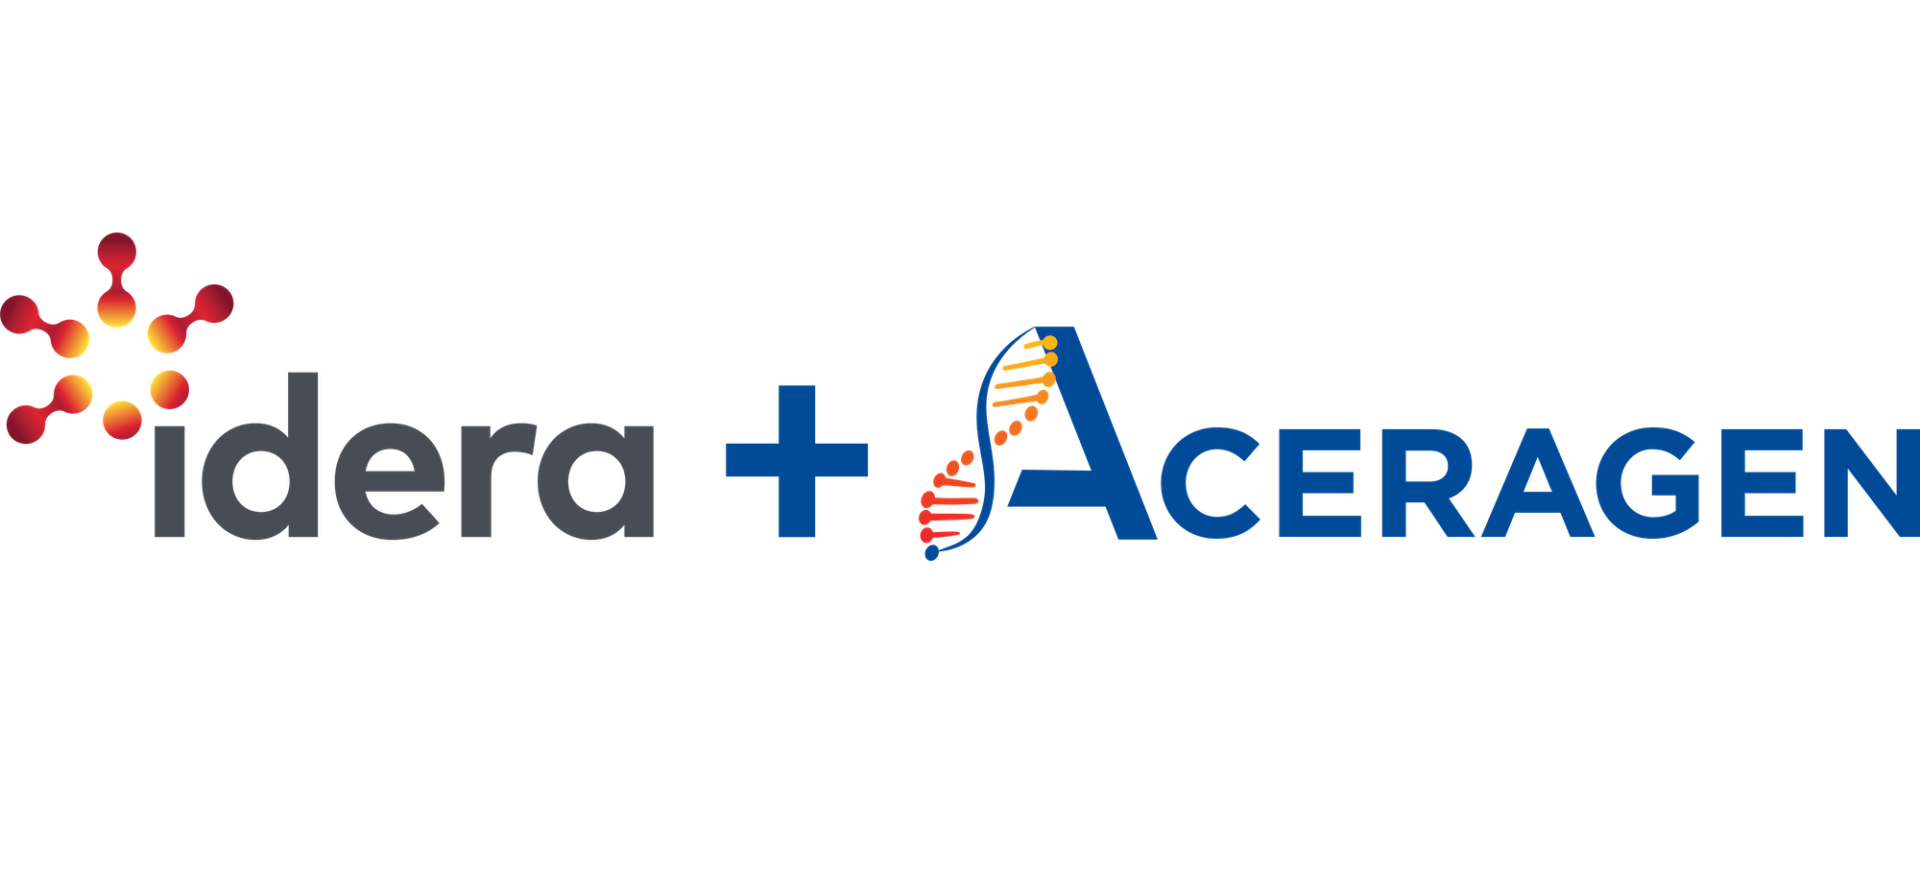 Idera Pharmaceuticals Announces Name Change to Aceragen, Inc. and Provides Near-Term Strategic Outlook